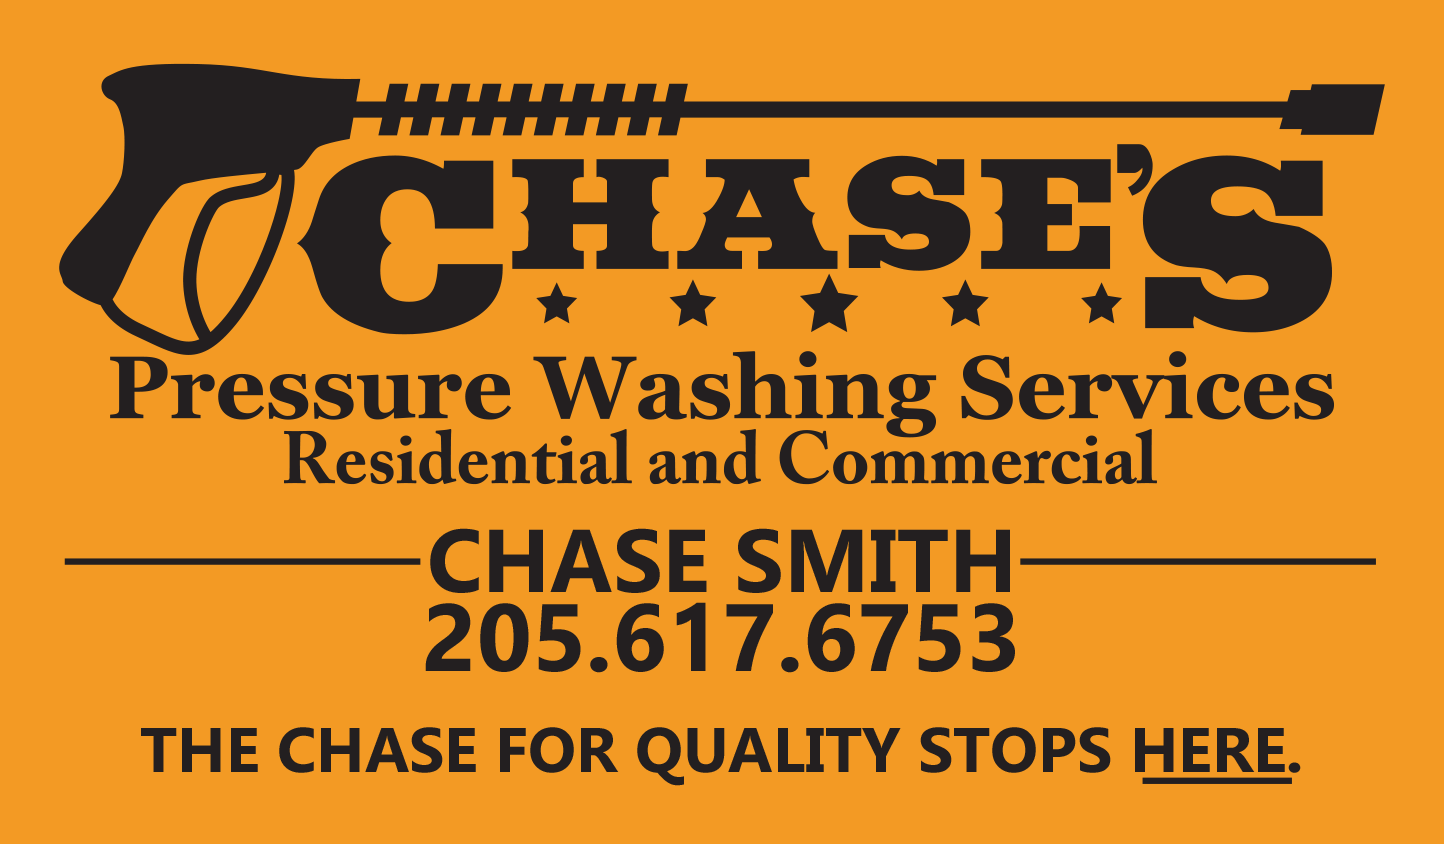 Chase's Pressure Washing Services Logo